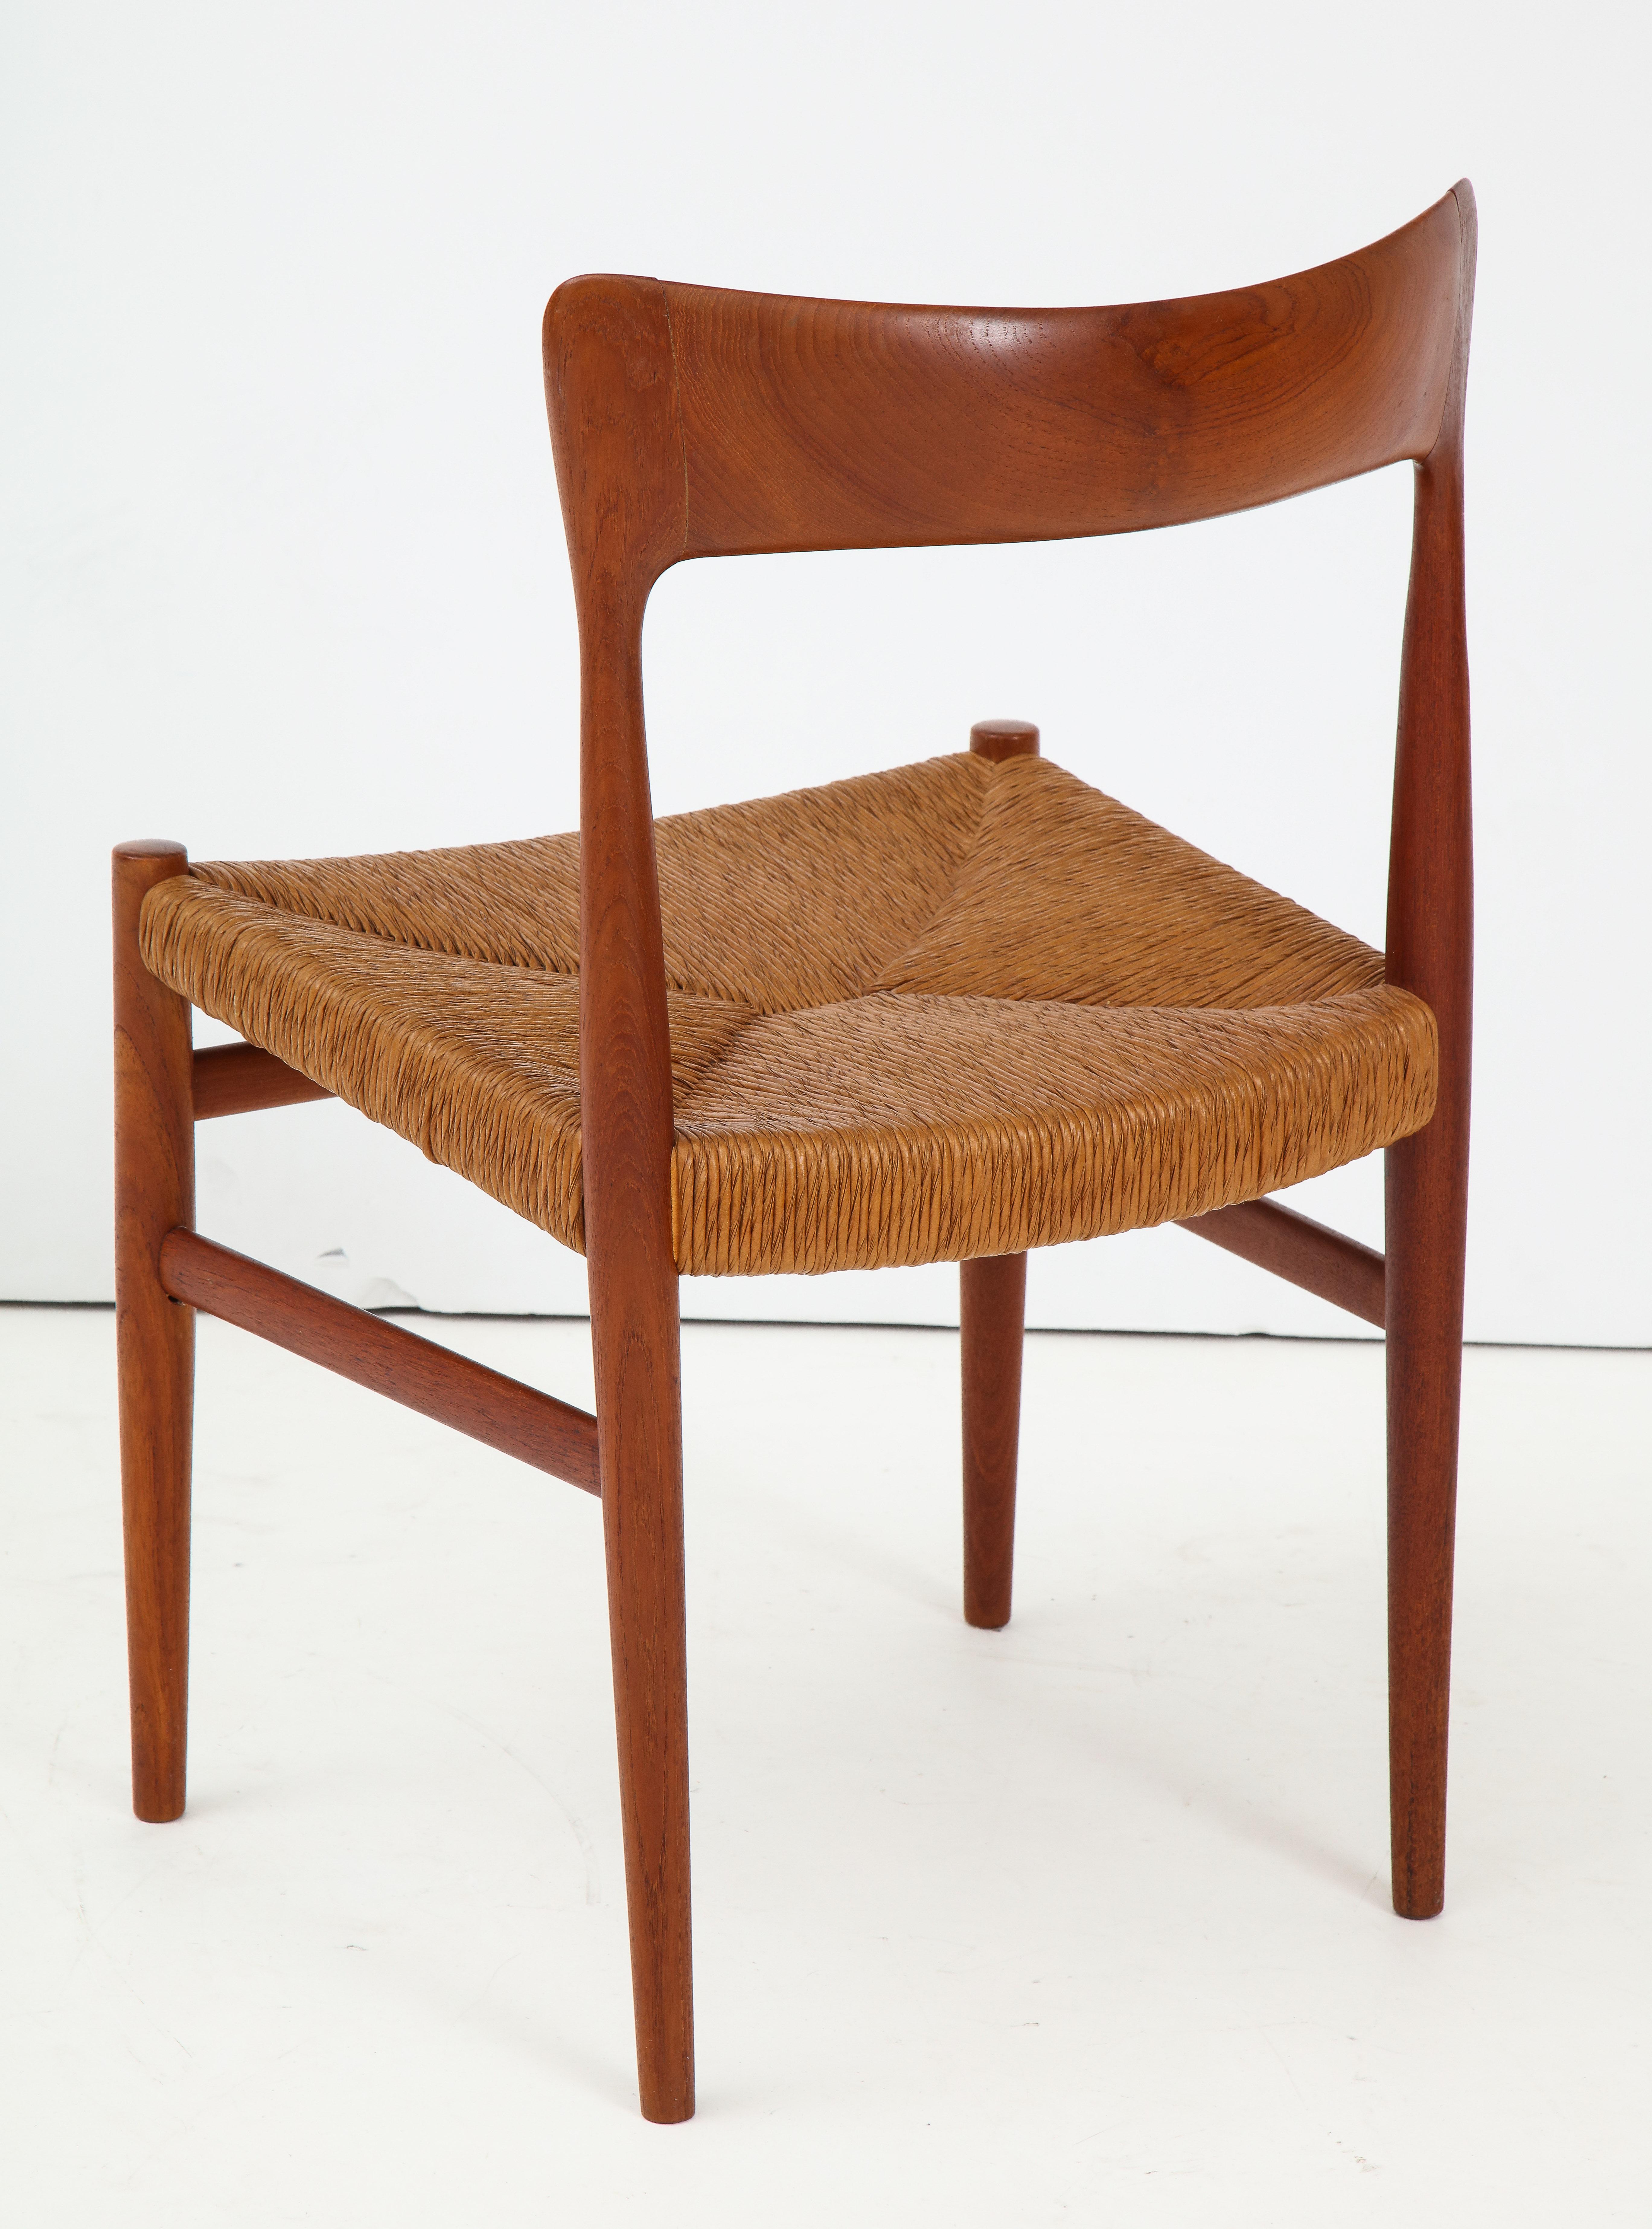 1950s Danish Teak Modernist Dining Chairs with Paper Cord Seats 4